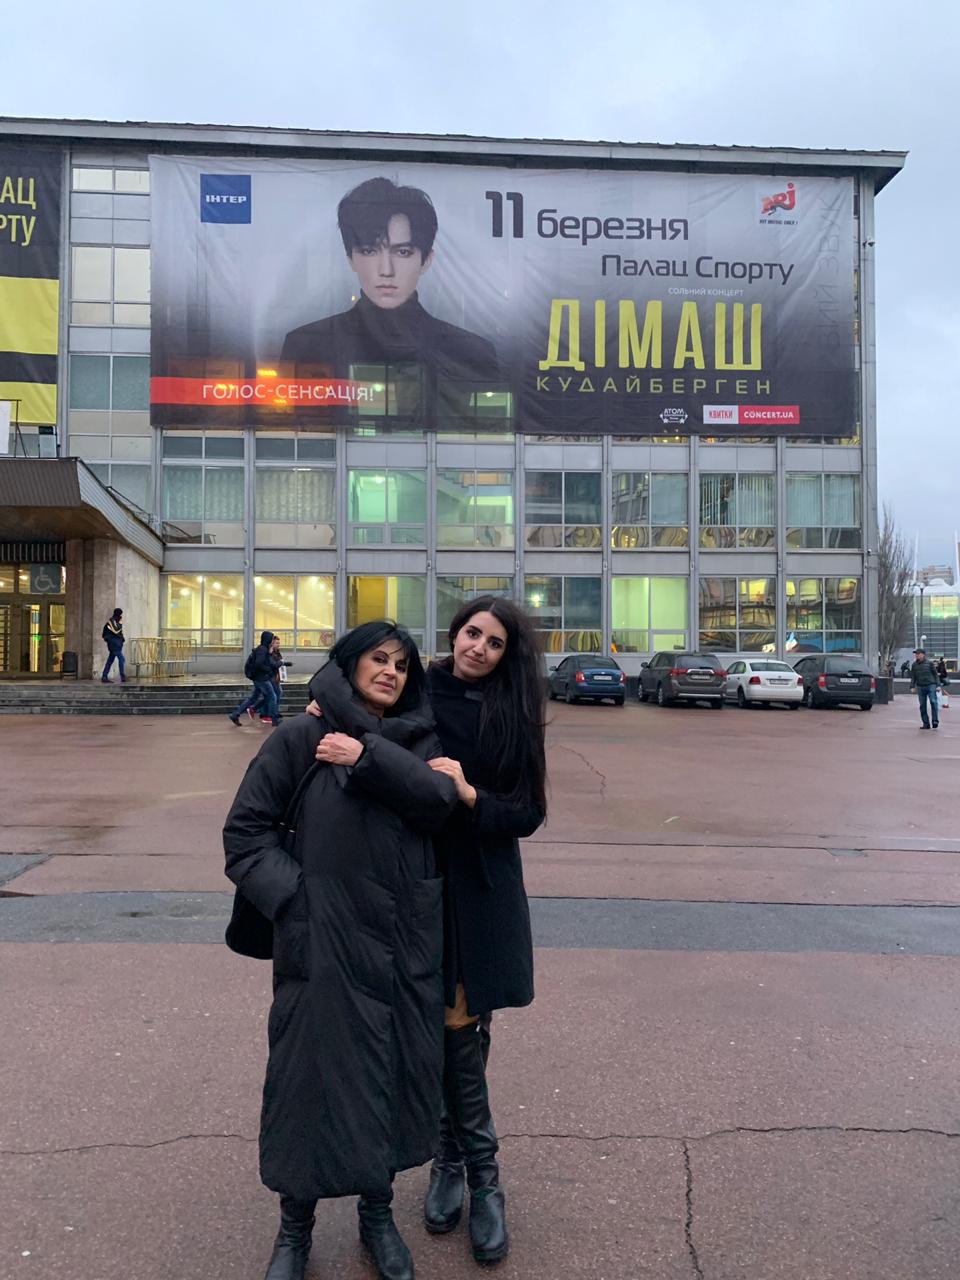 Fan flew to a concert for 36 hours to see Dimash in Kyiv